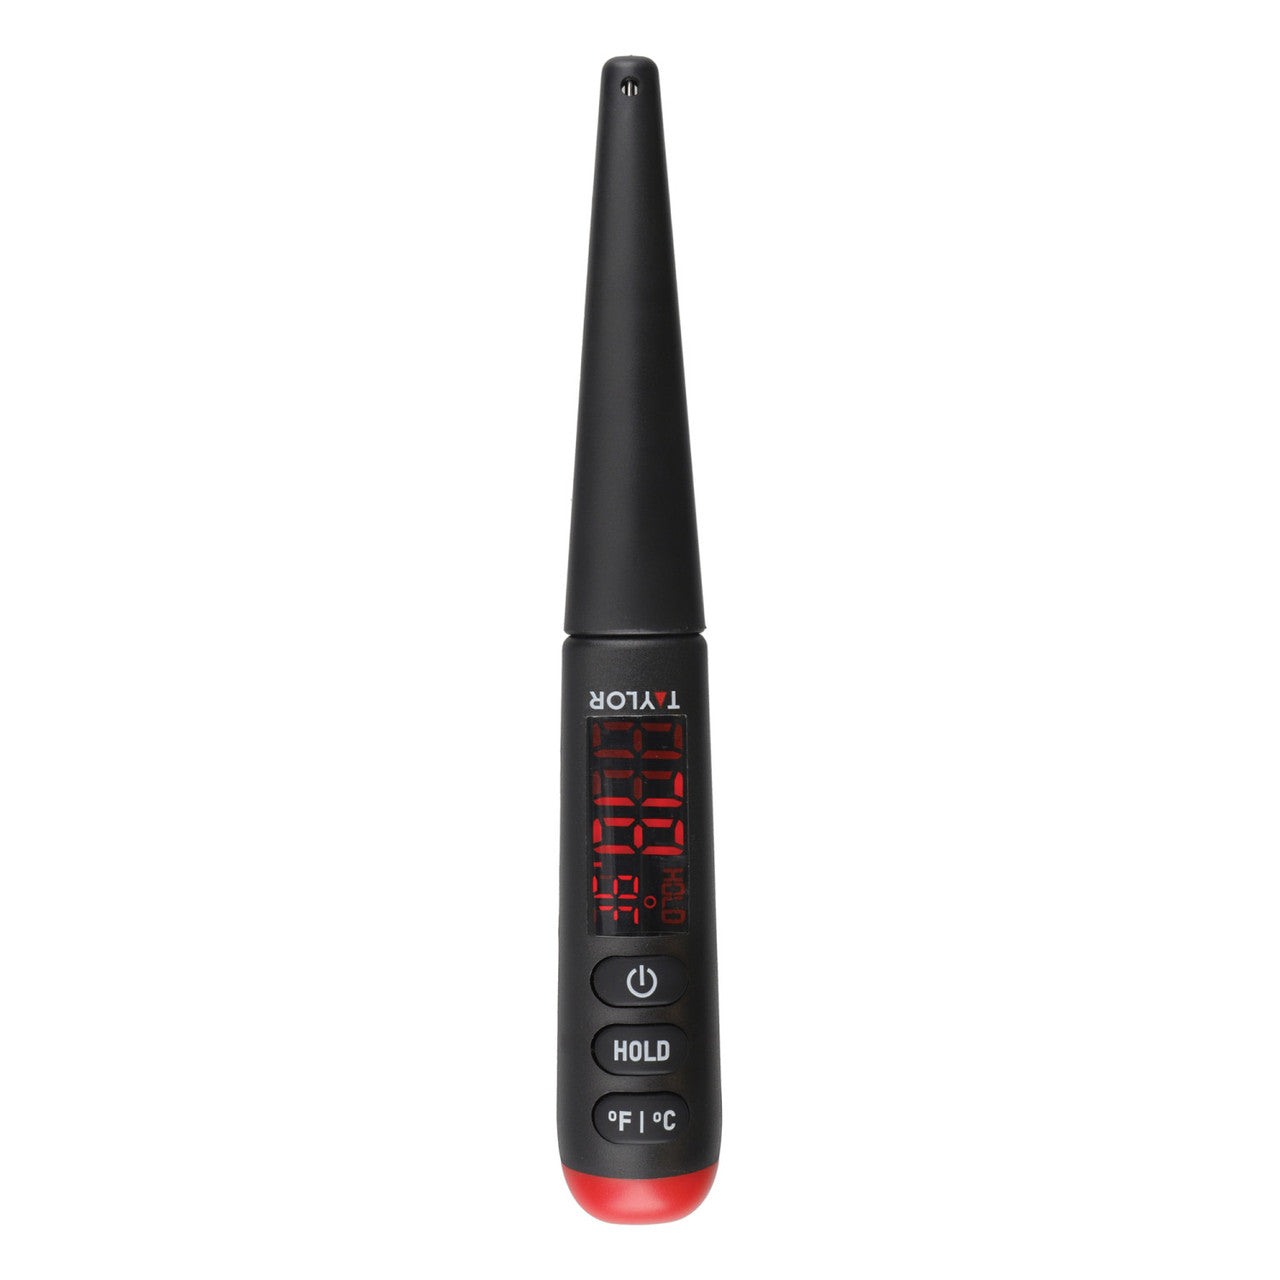 Taylor Pro Digital Food Thermometer Probe with Bright LED Display, Black, 24.5cm